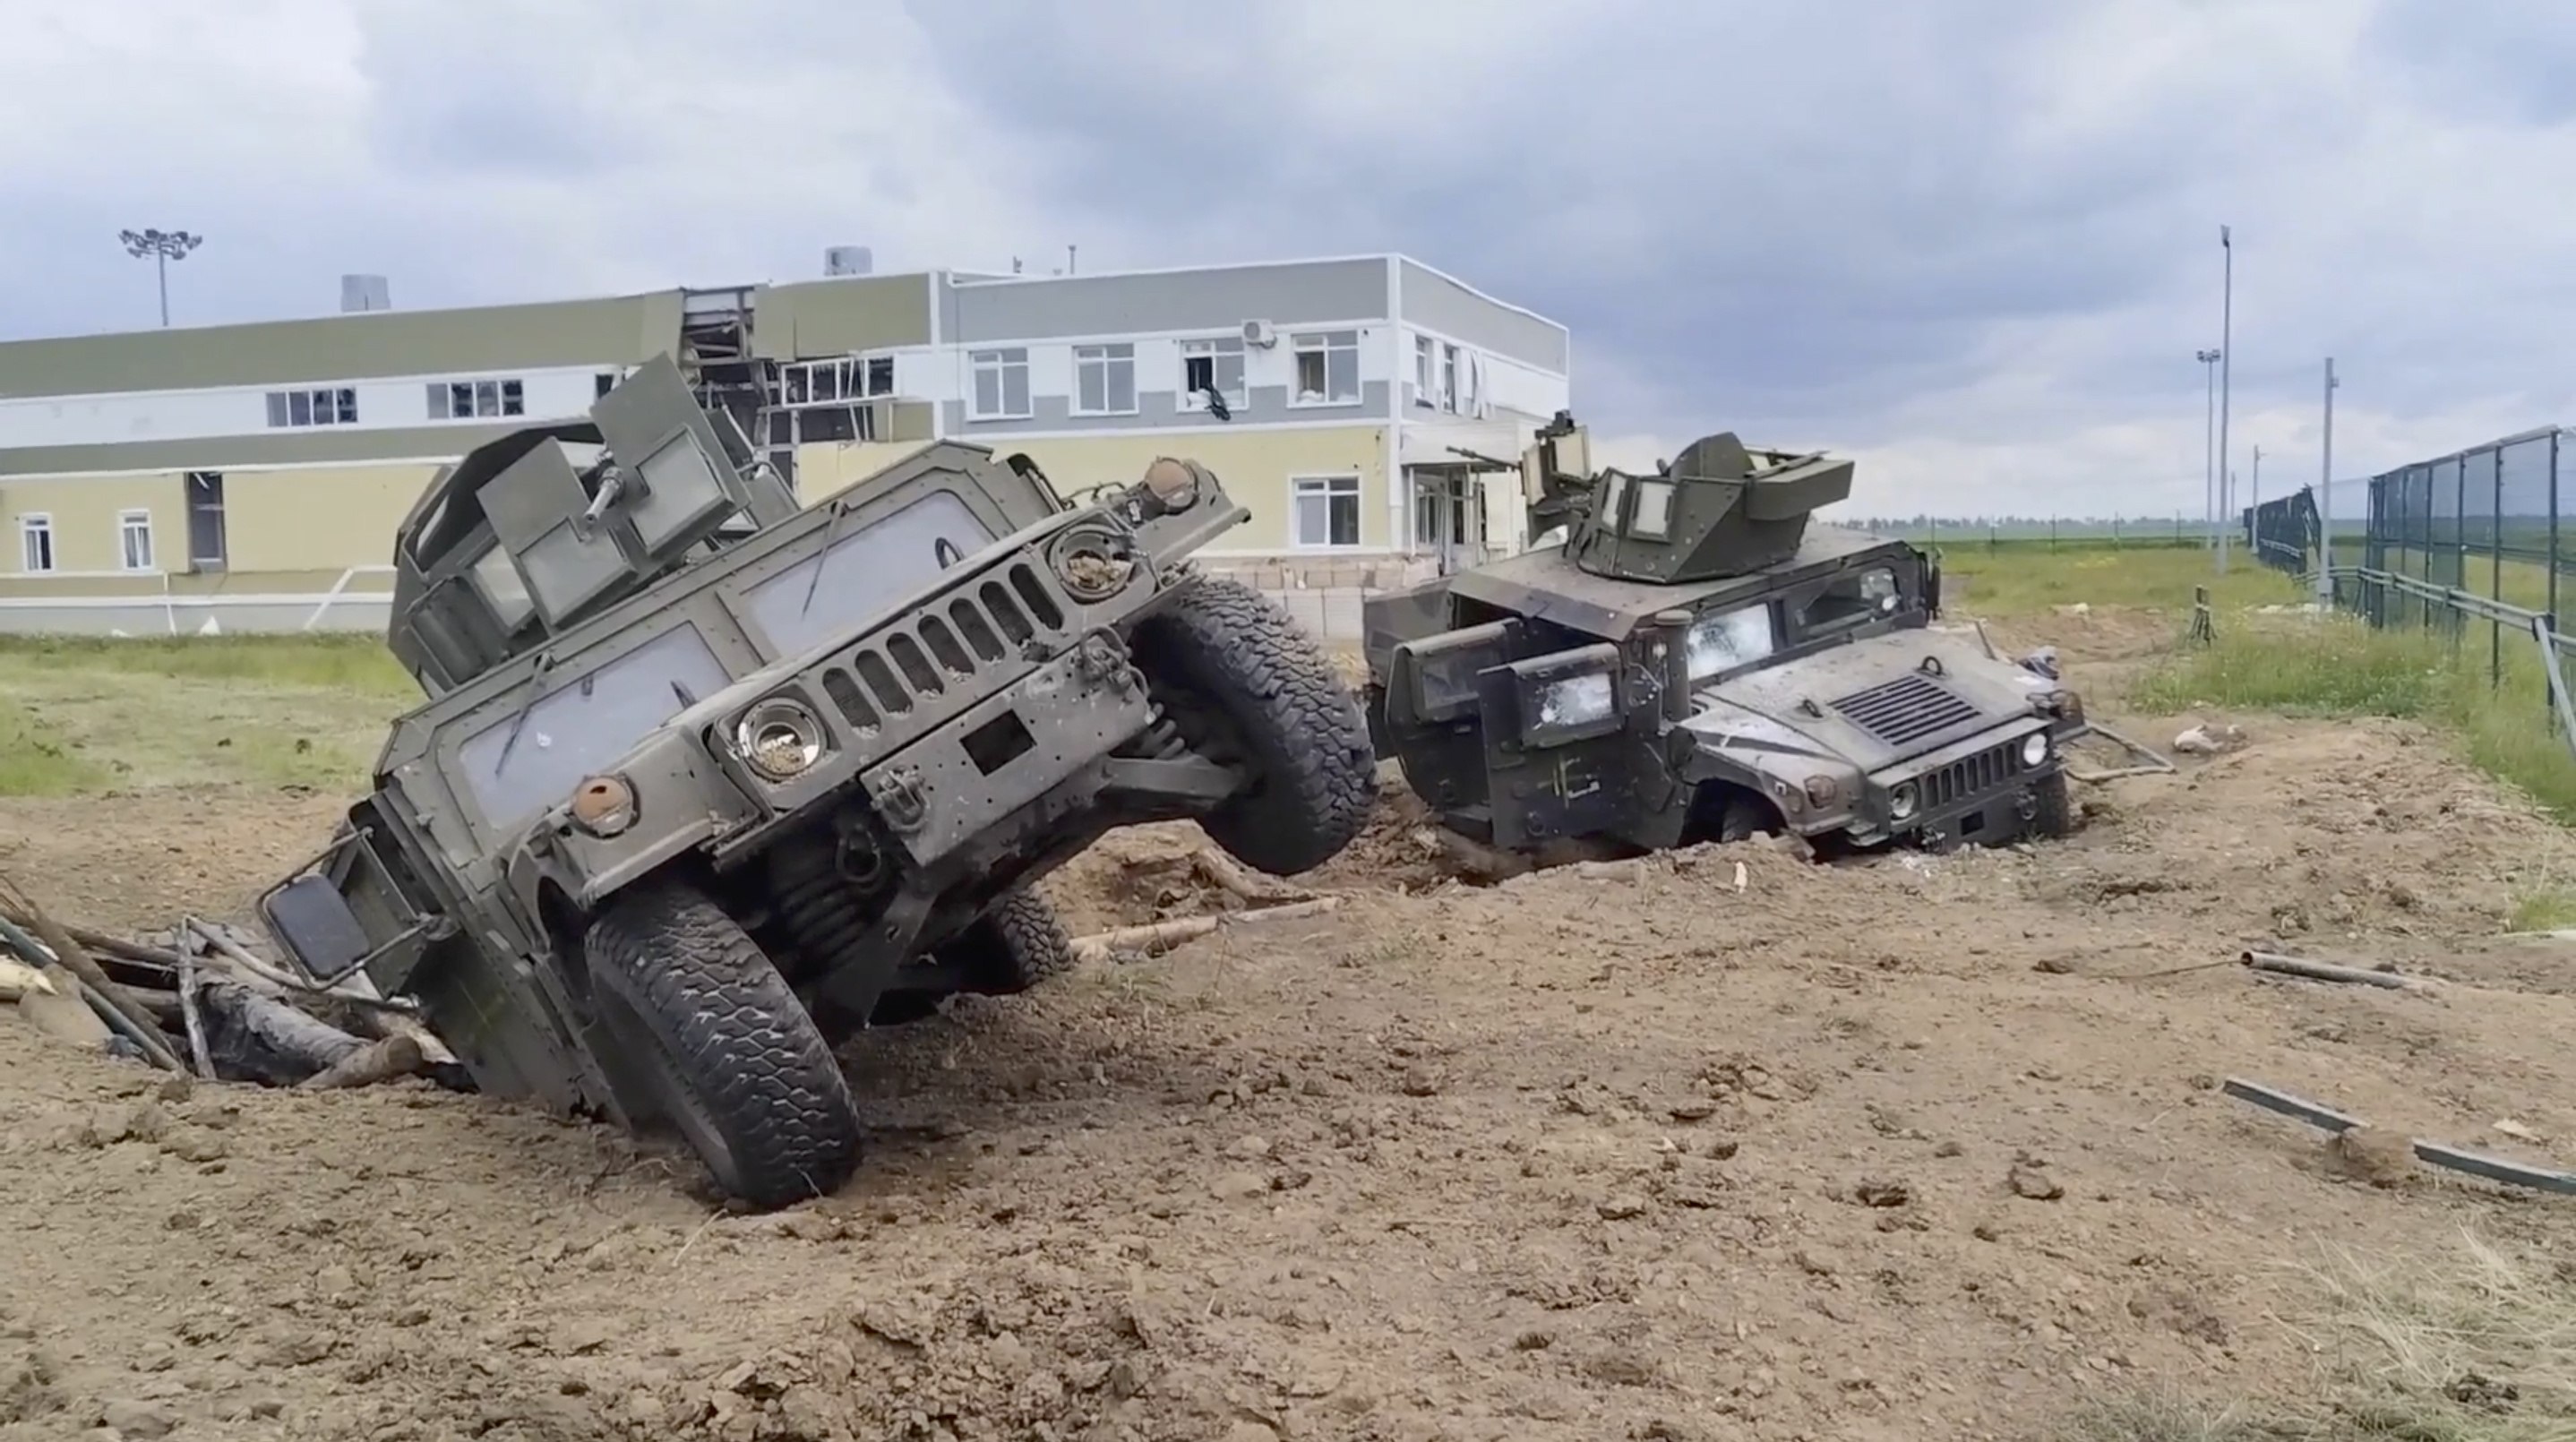 Destroyed armoured vehicles that look like US-made Humvees in the Grayvoronsky district of Belgorod region, Russia. Photo: Russian Defence Ministry via EPA-EFE